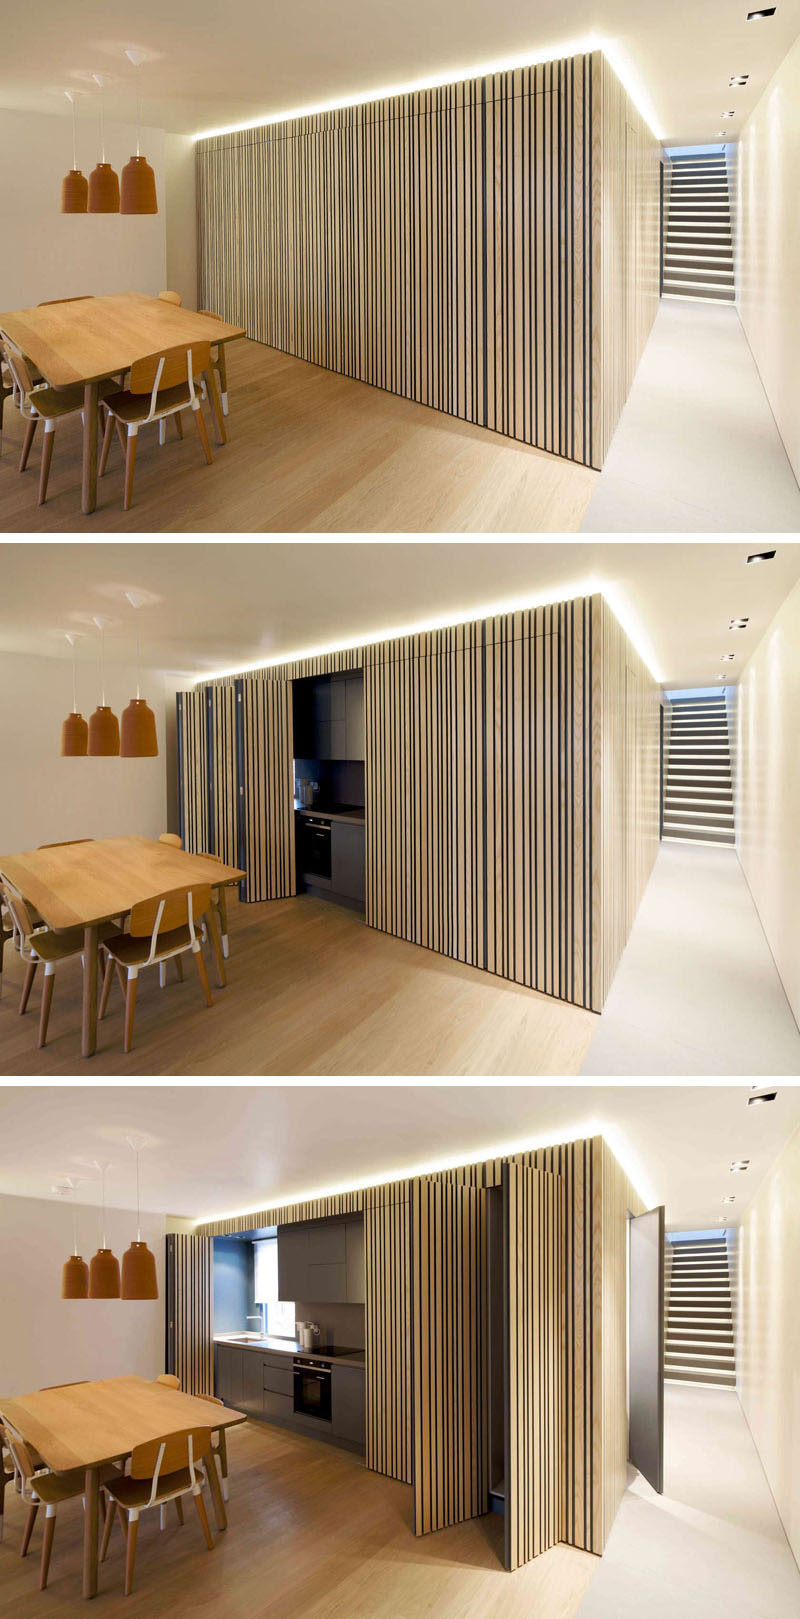 This kitchen can be completely hidden when not in use | CONTEMPORIST